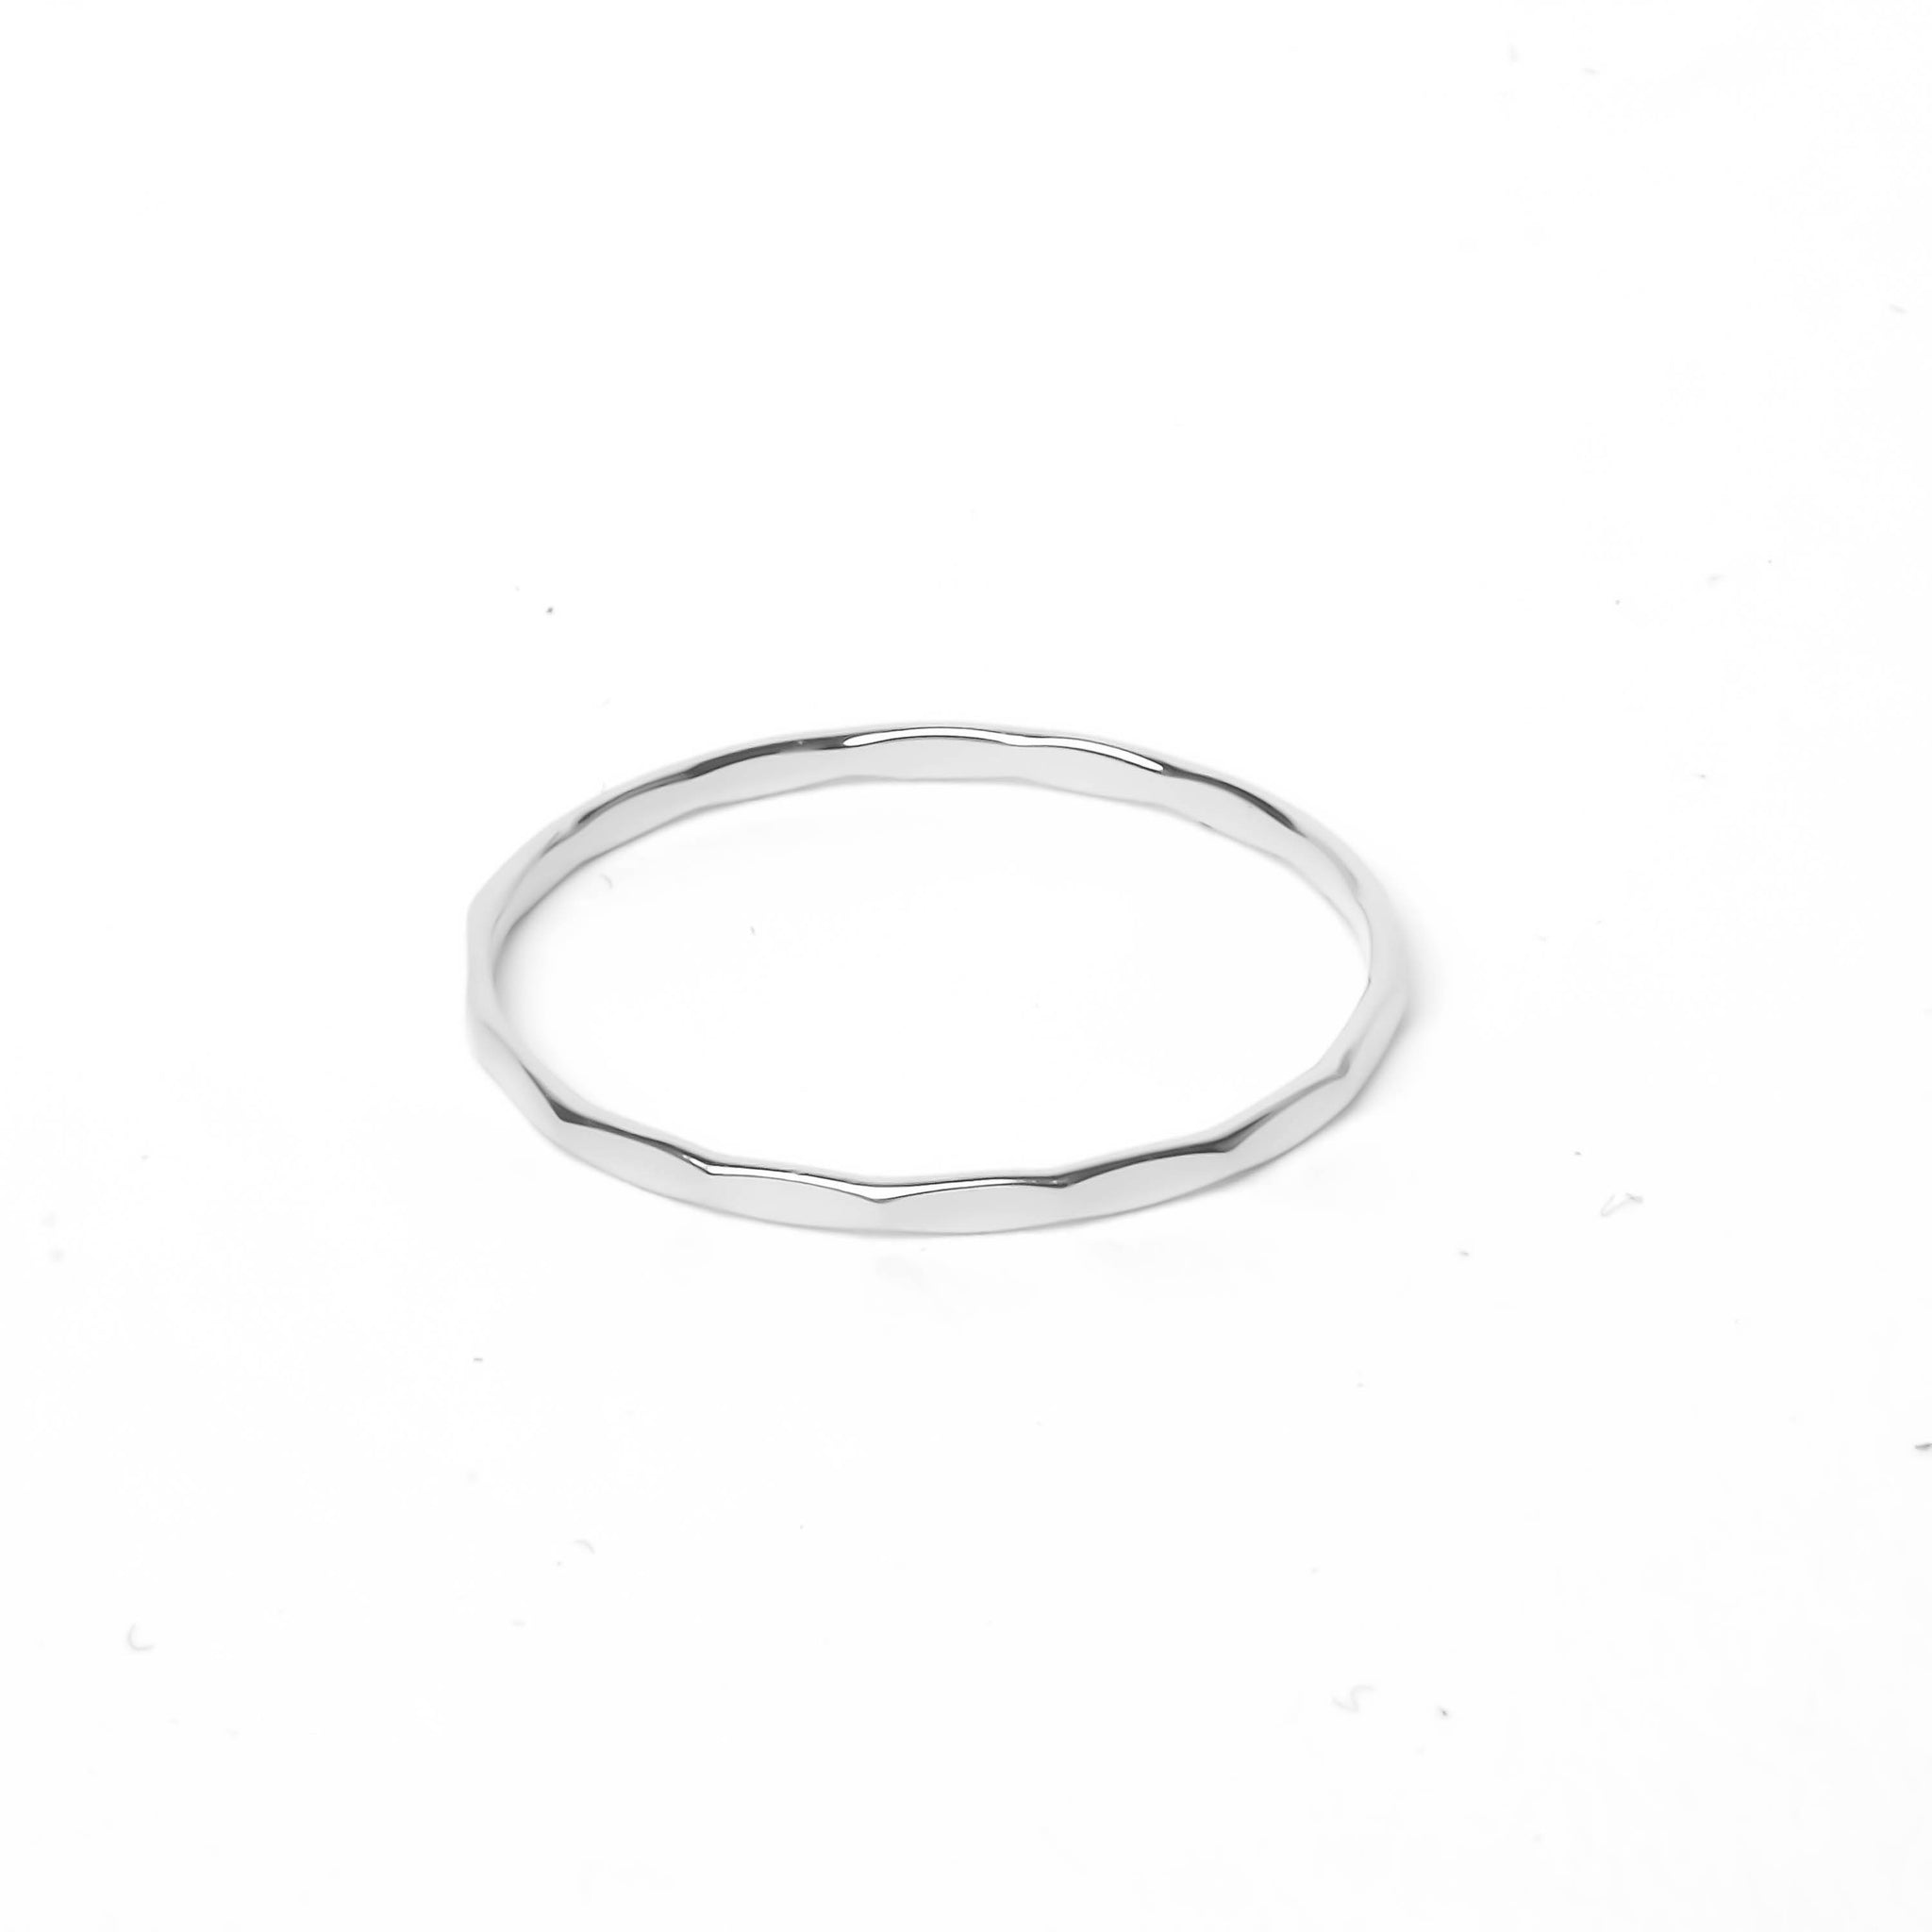 Silver flat ring with hammered groove decorations